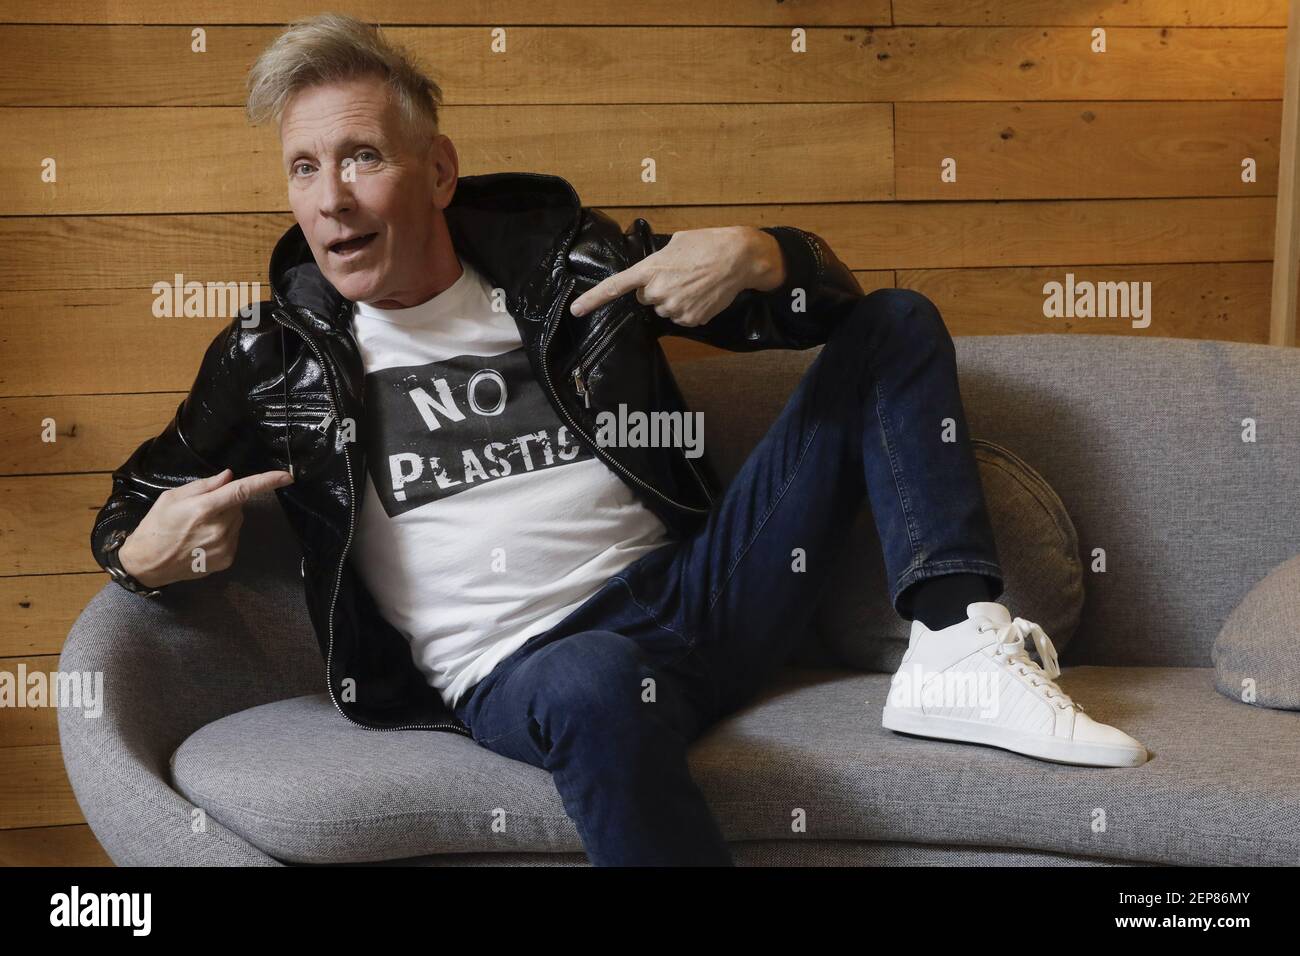 Singer Plastic Bertrand aka Roger Jouret poses for the photographer during an interview at radio station Nostalgie, on the 30th anniversary of the New Beat music genre on Wednesday, November 13, 2019 in Brussels, Belgium. (Photo by BELGA PHOTO/THIERRY ROGE/Sipa USA) Stock Photo